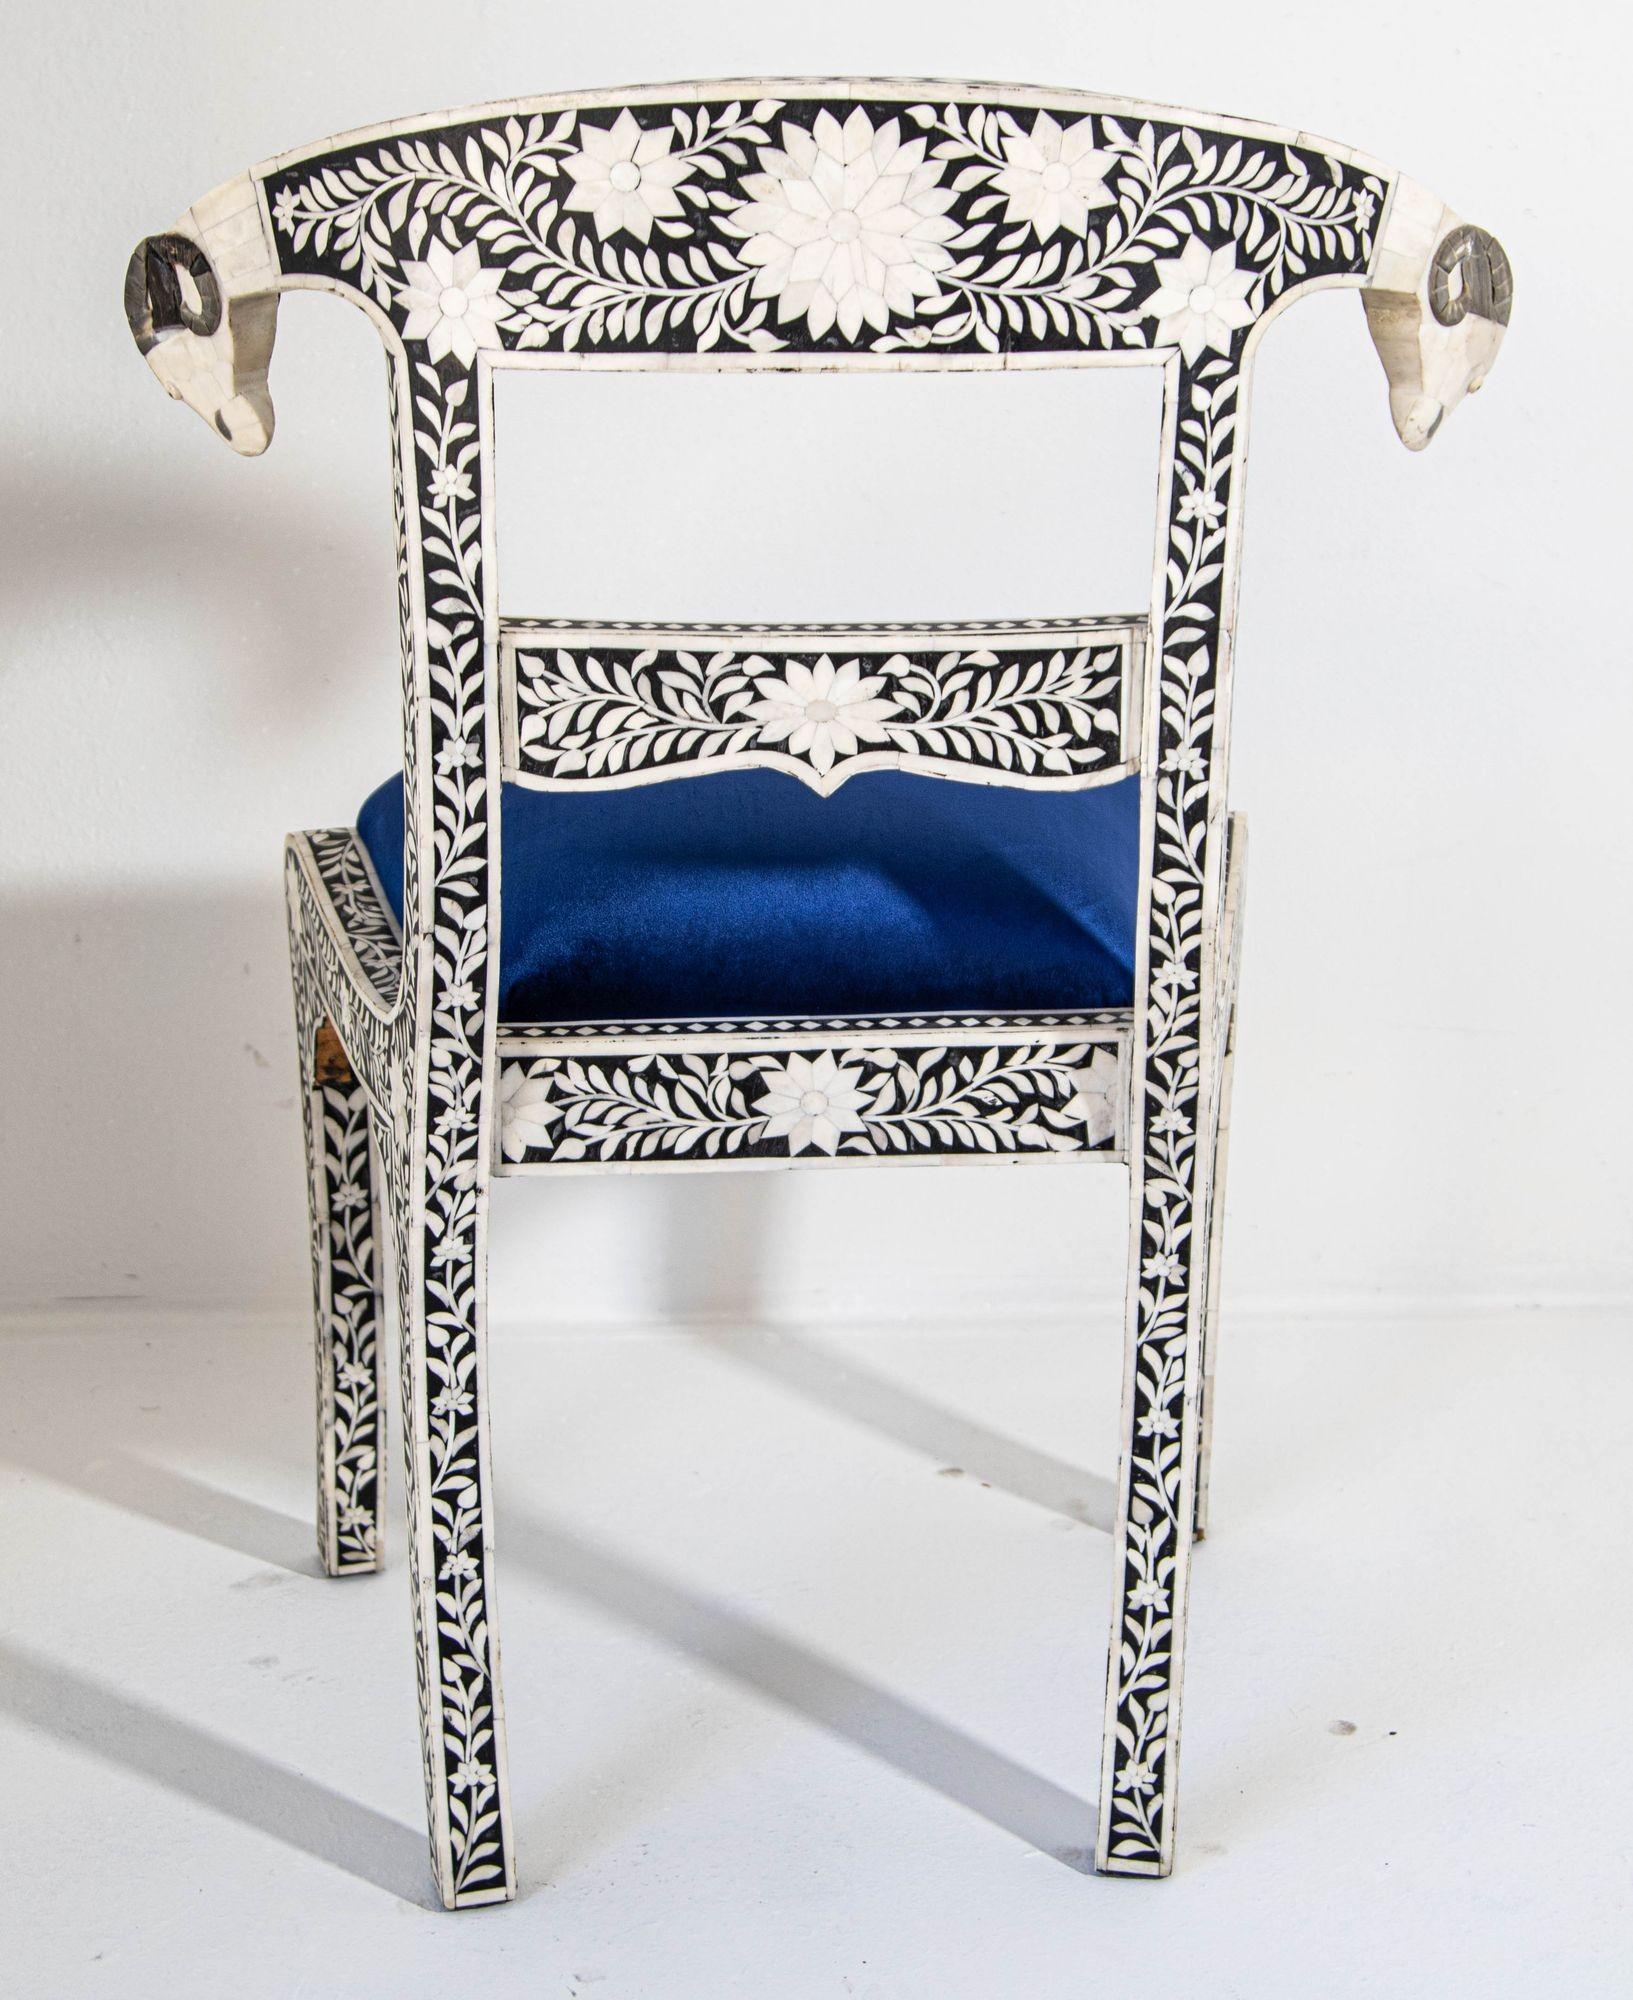 Antique Anglo-Indian Side Chairs with Ram's Head Bone Inlay Royal Blue Seat Pair For Sale 10